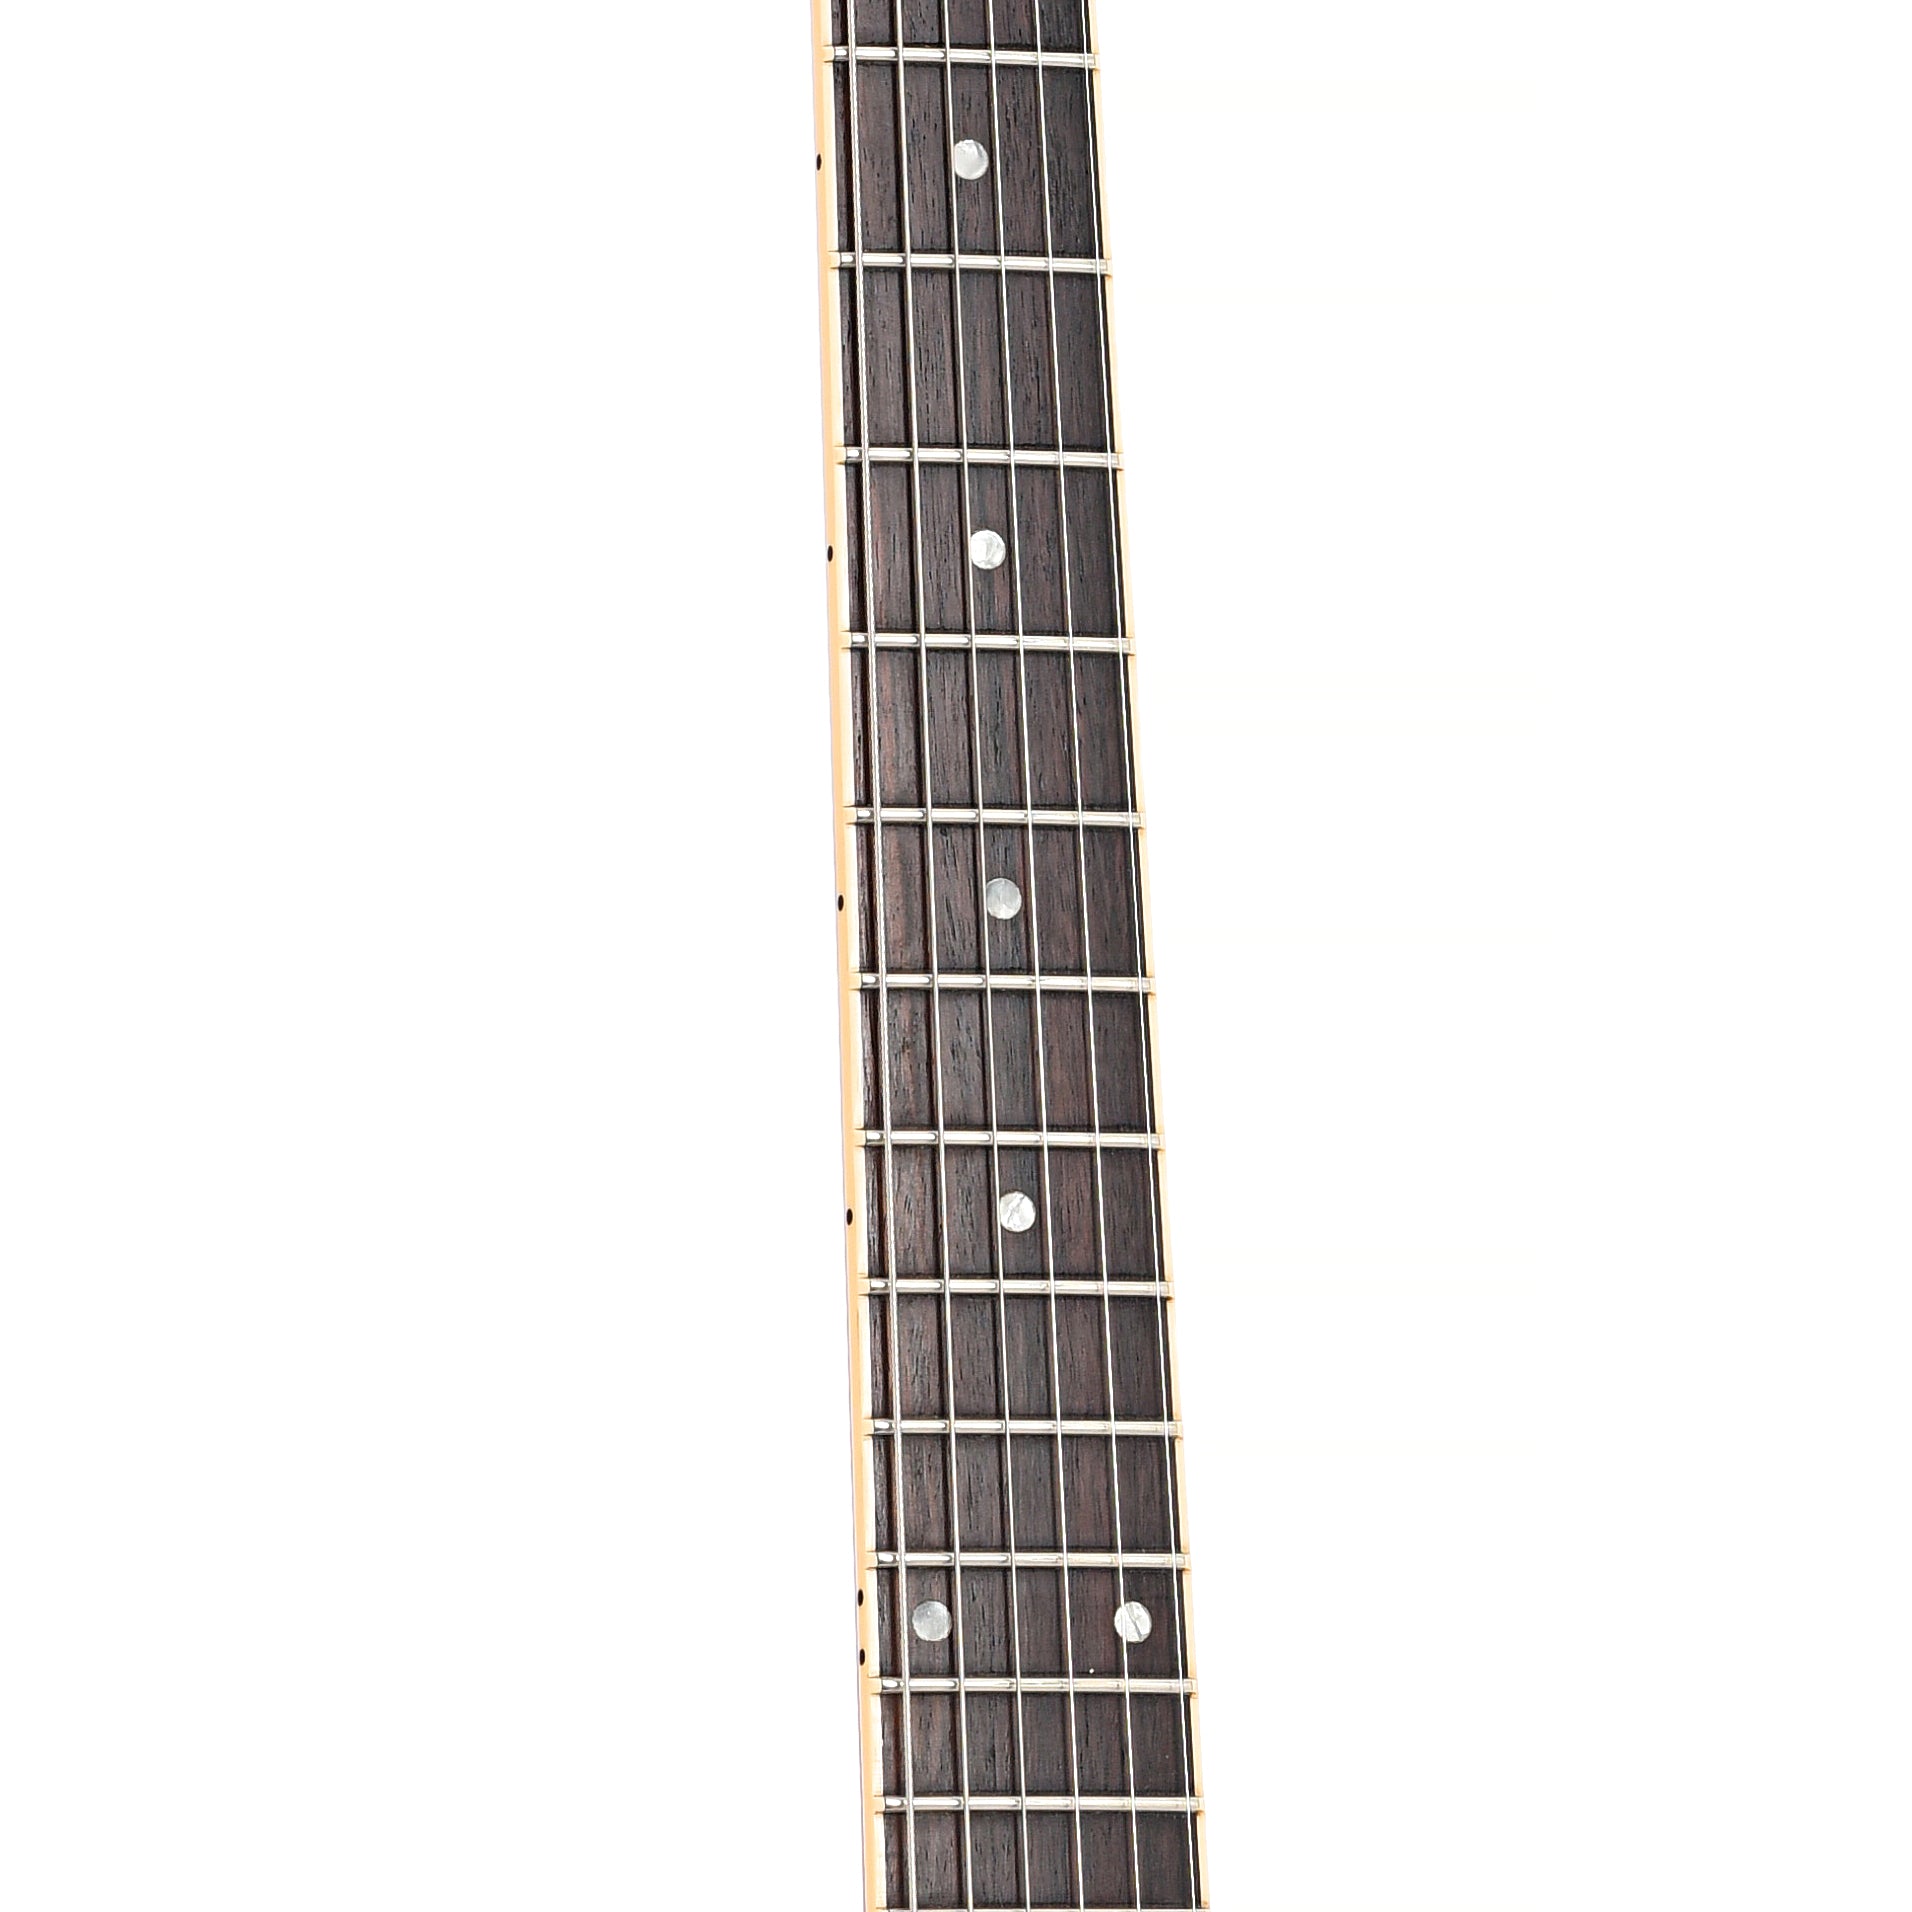 Fretboard of Gibson ES-335 Hollow Body Electric Guitar (1999)